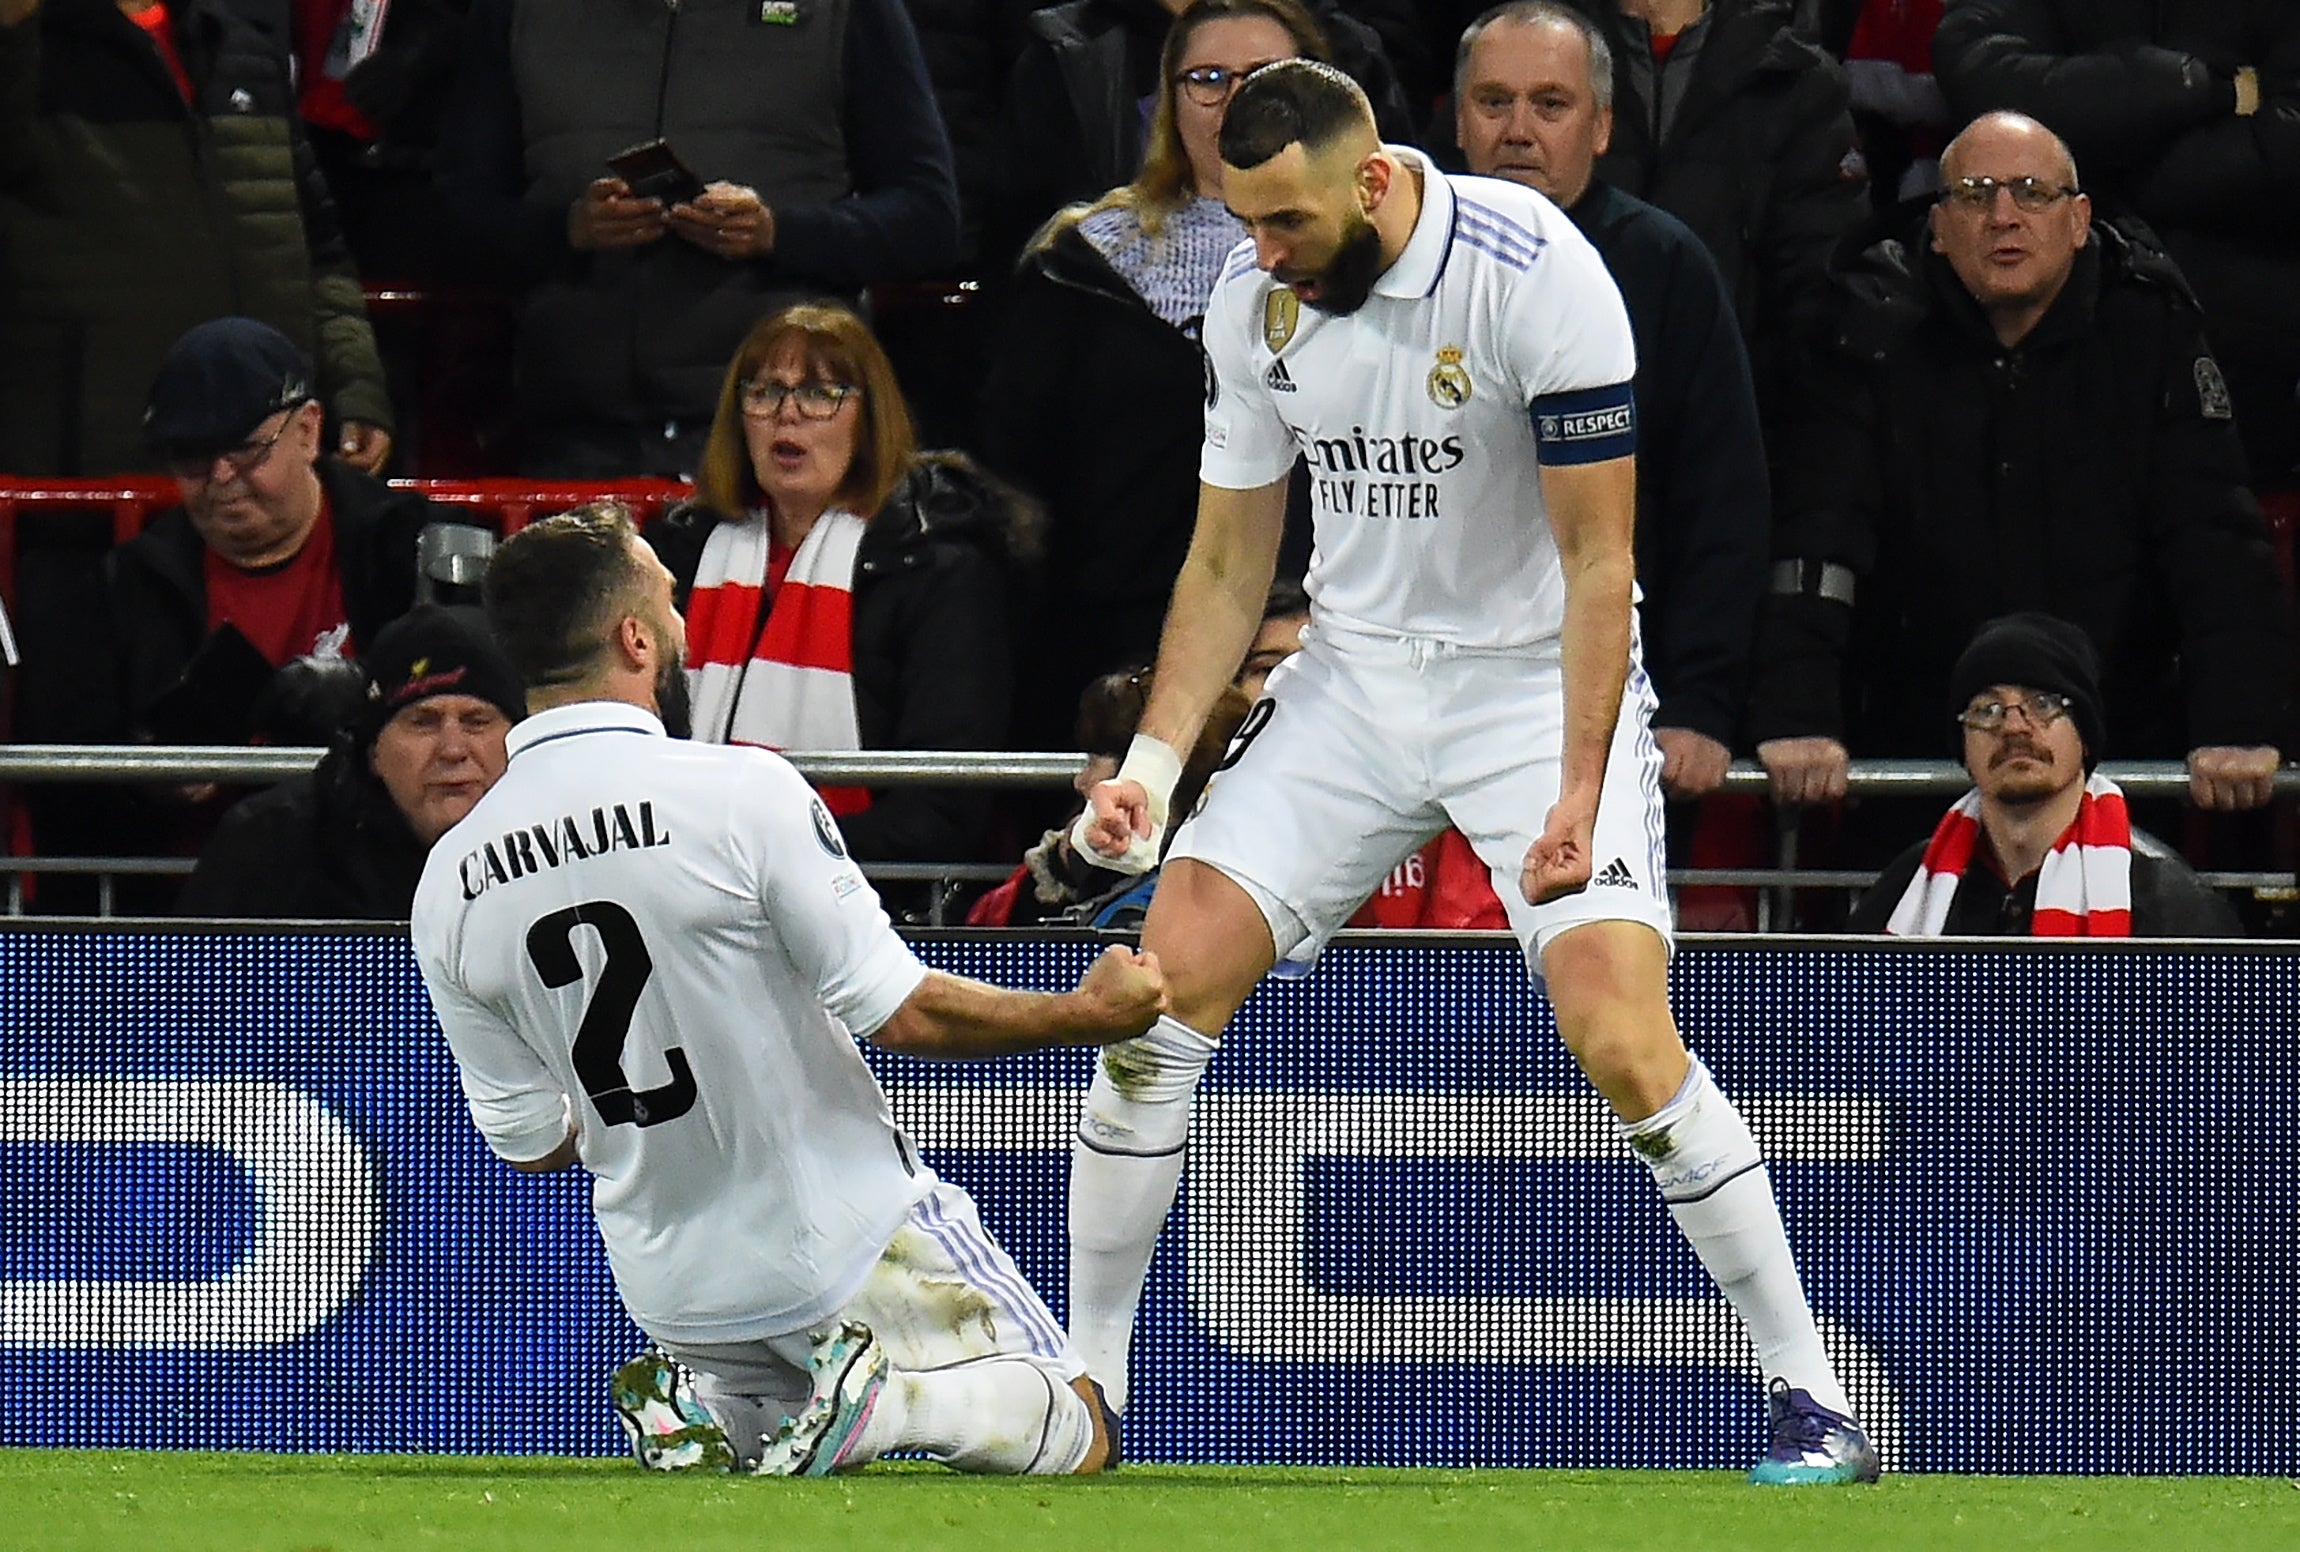 Real Madrid demonstrated their superiority over Liverpool once again